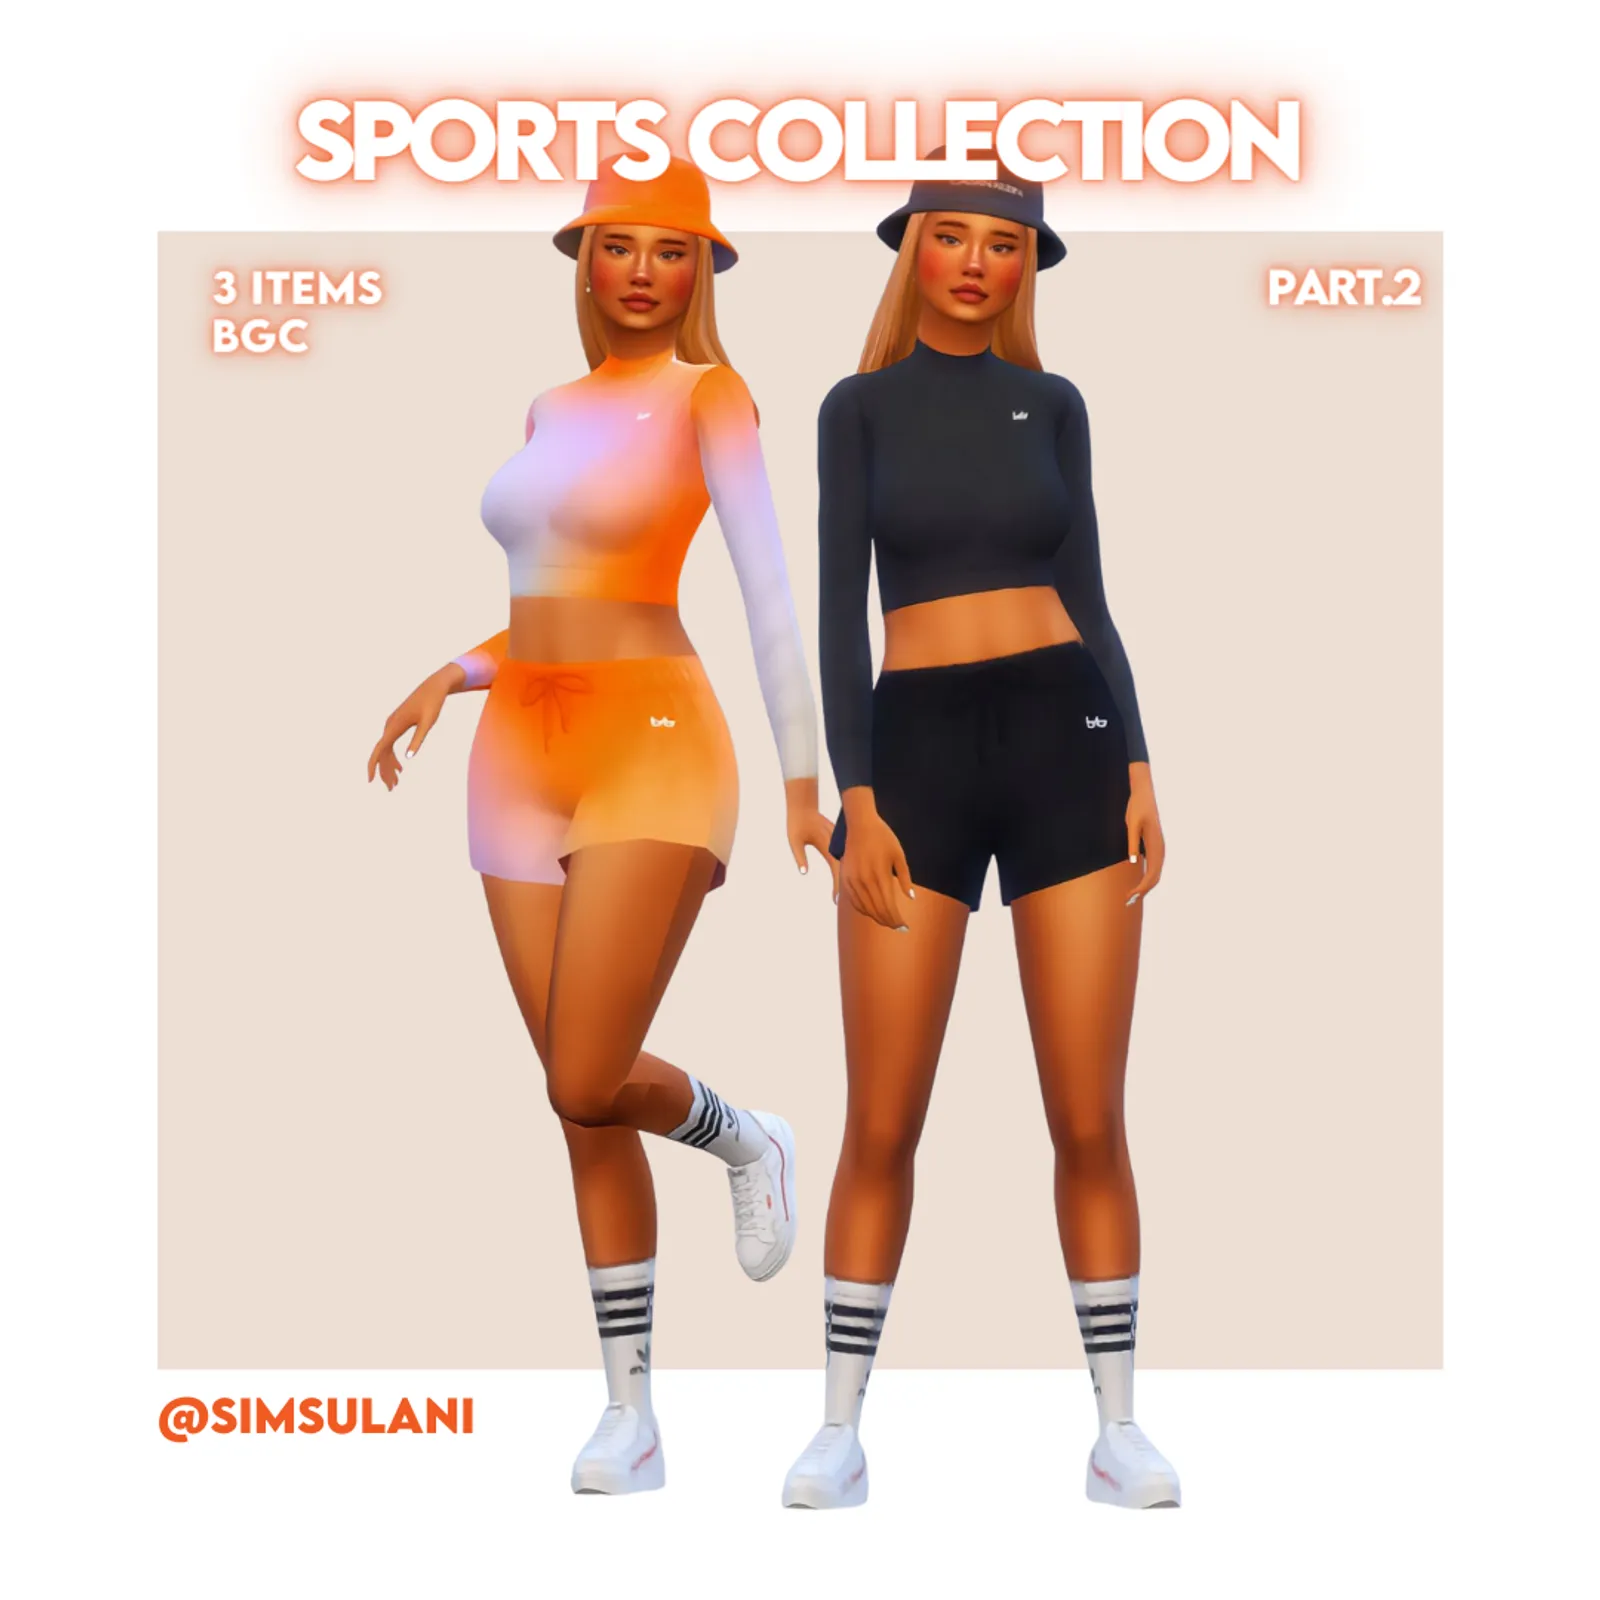 #CLOTHES | SPORTS COLLECTION | Part 2 